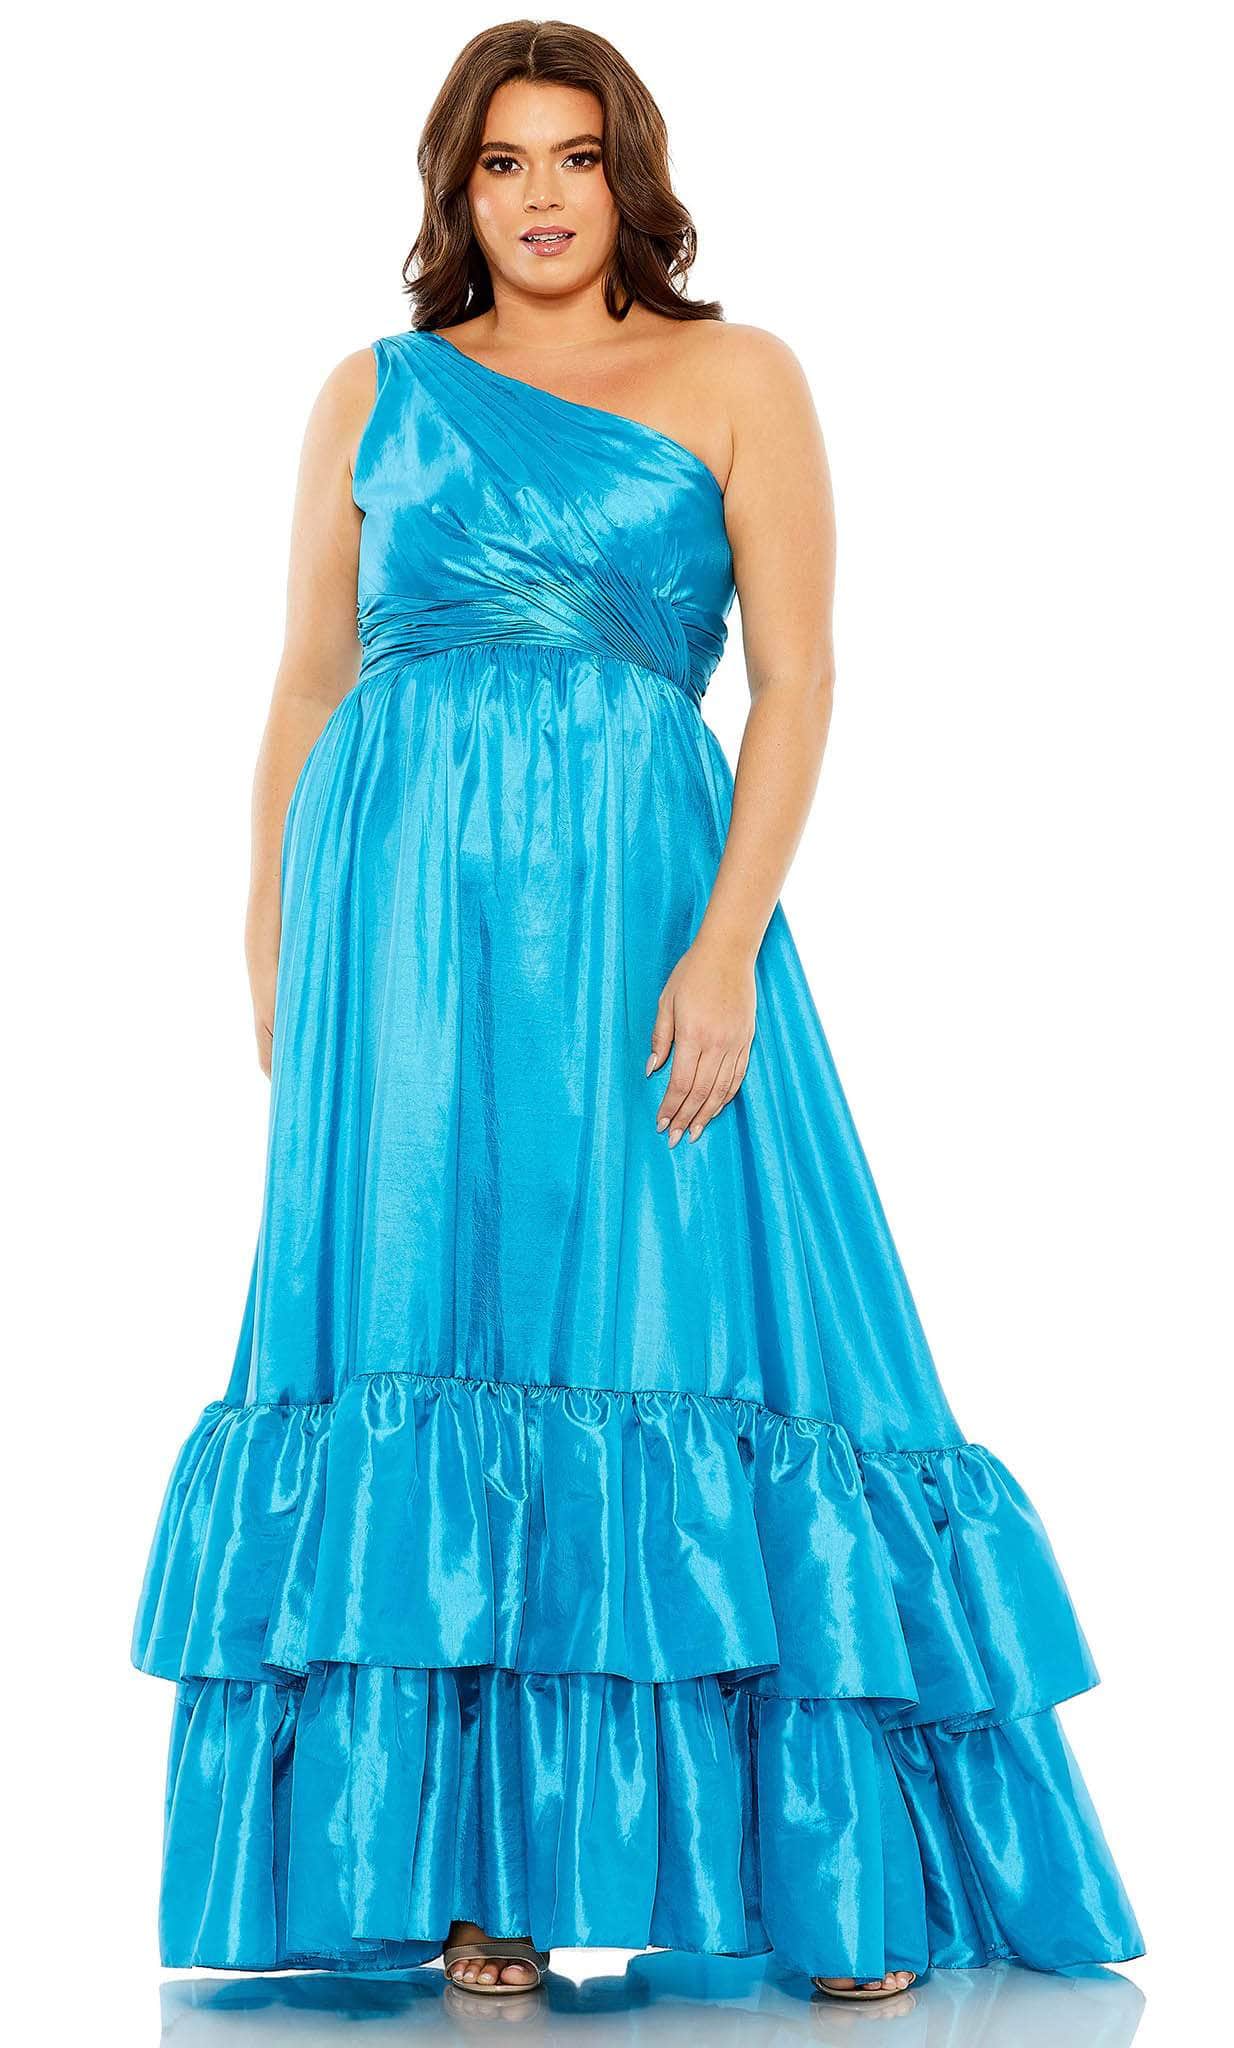 Mac Duggal 68527 - Ruffle Tiered A-Line Evening Gown Special Occasion Dress 14W / Turquoise